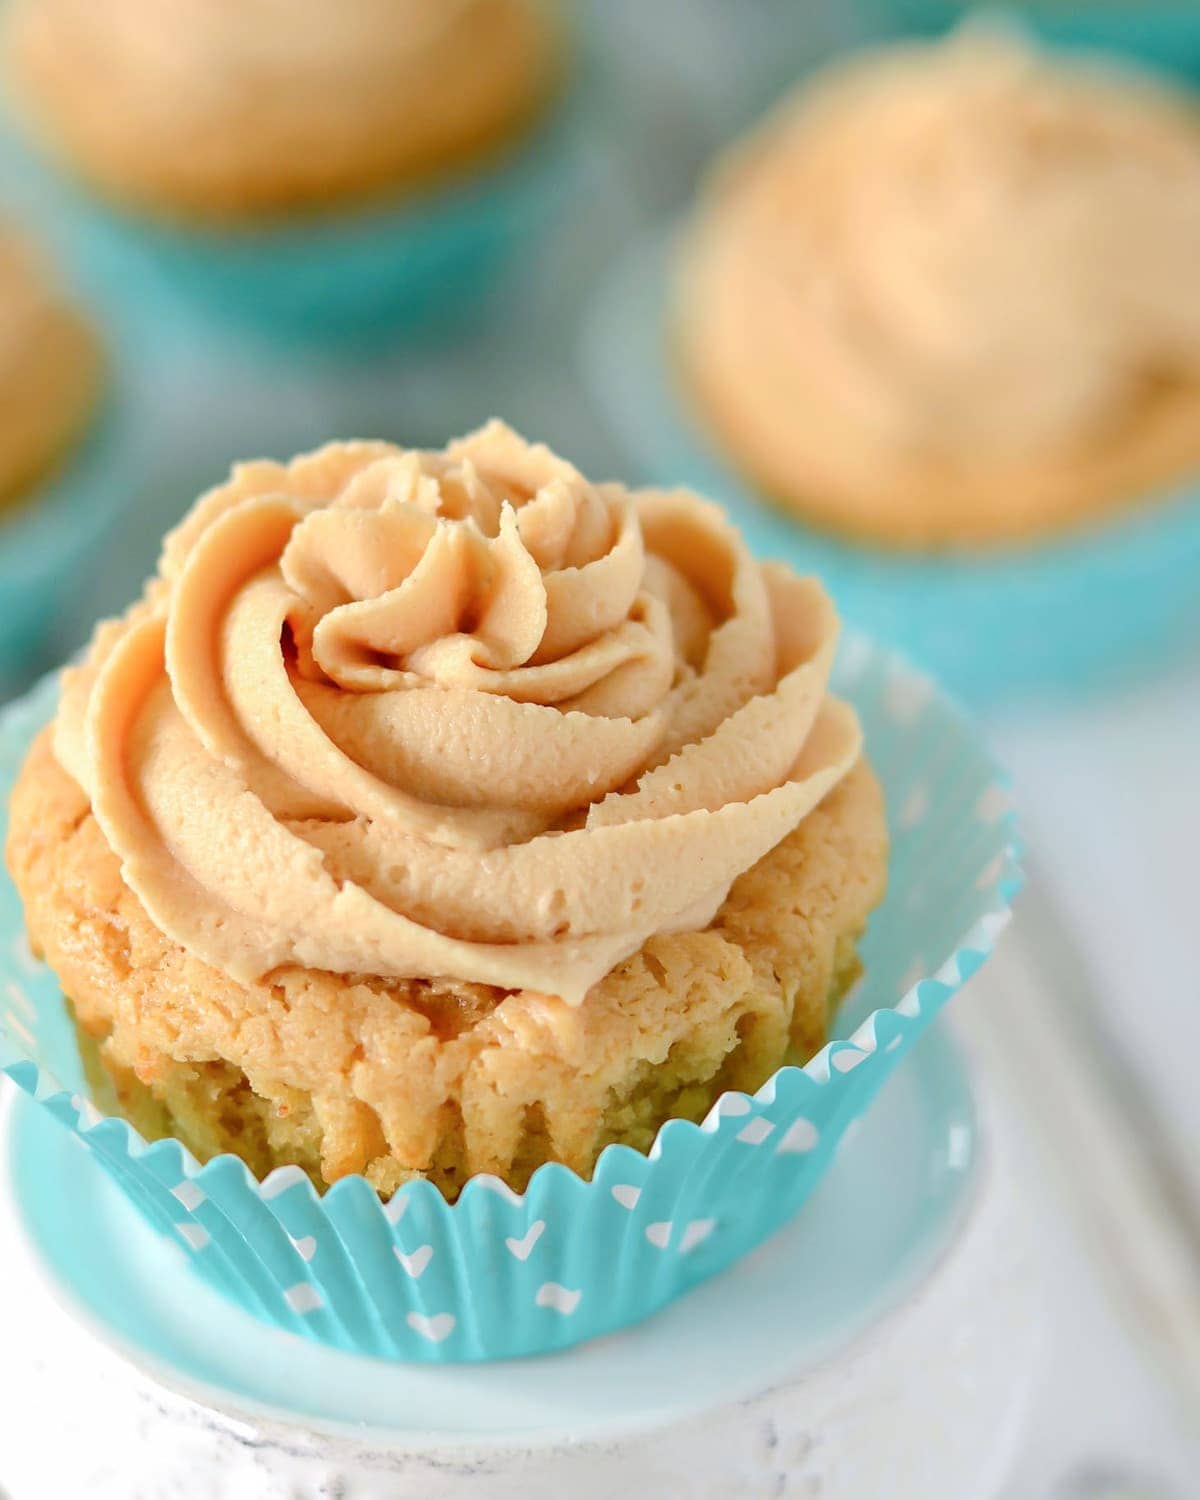 Peanut butter cupcakes with peanut butter frosting on a white plate.